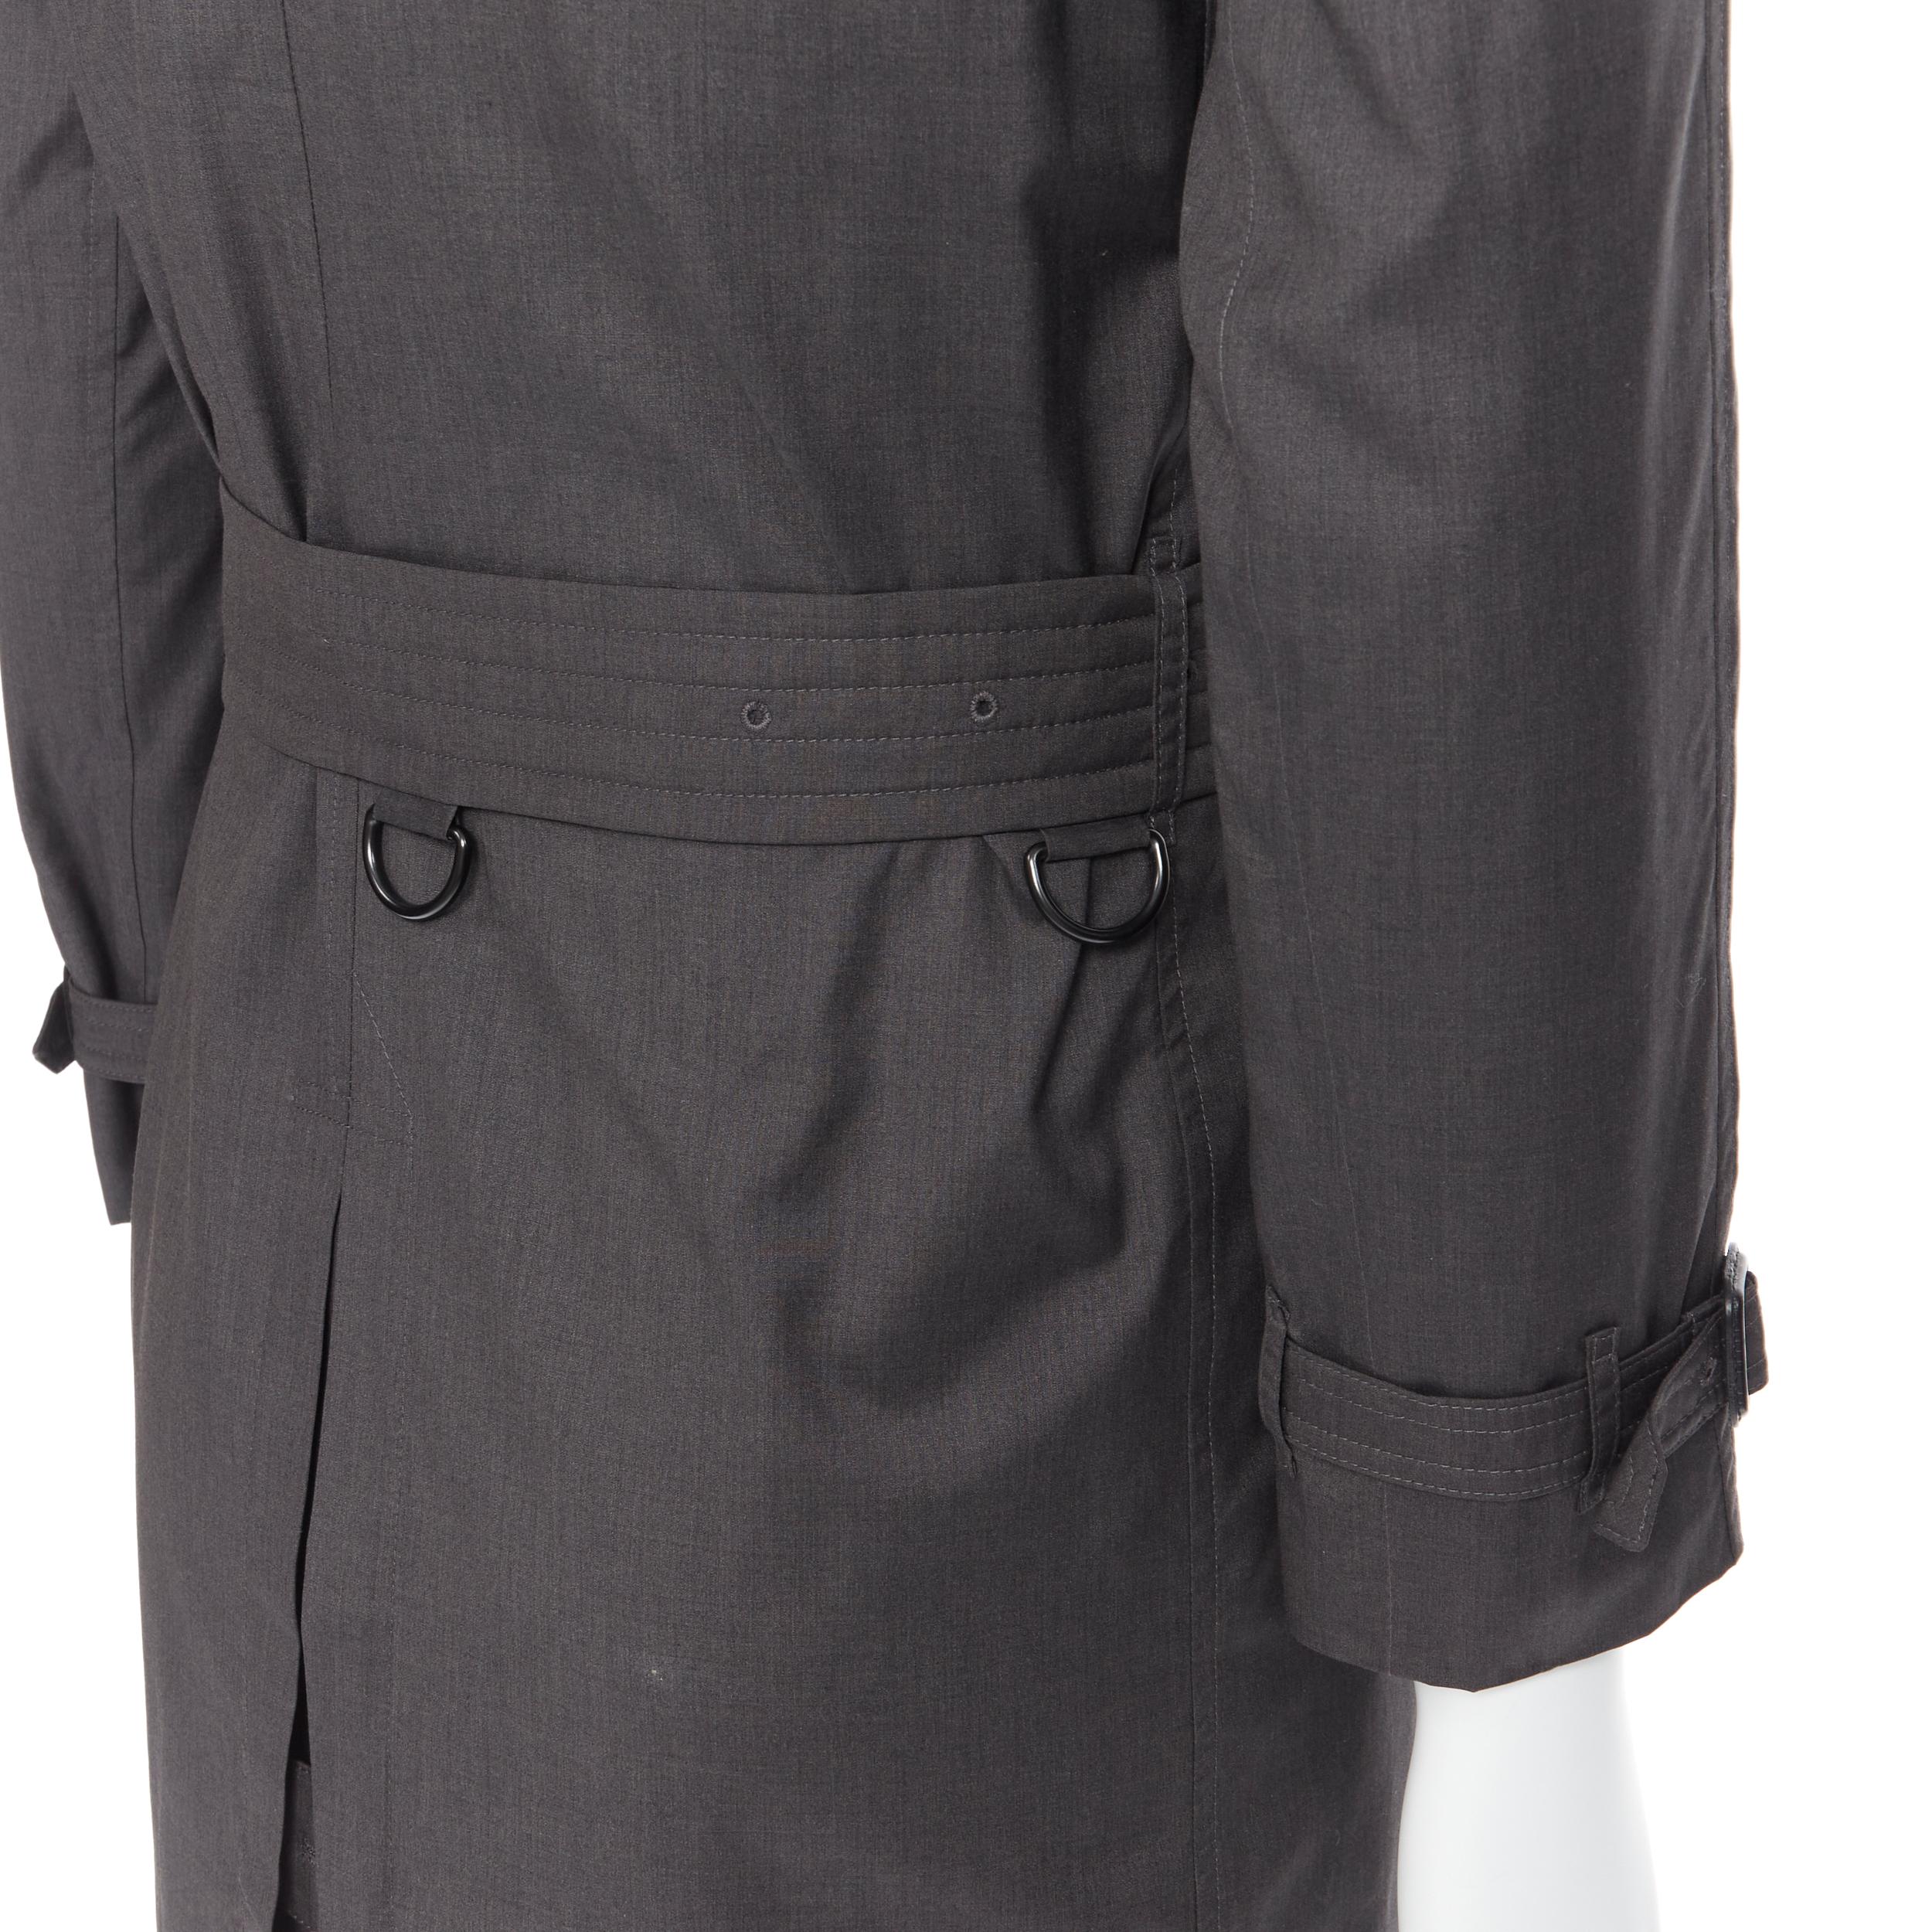 BURBERRY PRORSUM grey wool silk double breasted belted trench coat EU44 XS Reference: PRCN/A00040 
Brand: Burberry 
Material: Wool 
Color: Grey 
Pattern: Solid 
Closure: Button 
Extra Detail: Wool silk blend. Dark grey. Double breasted. Detachable